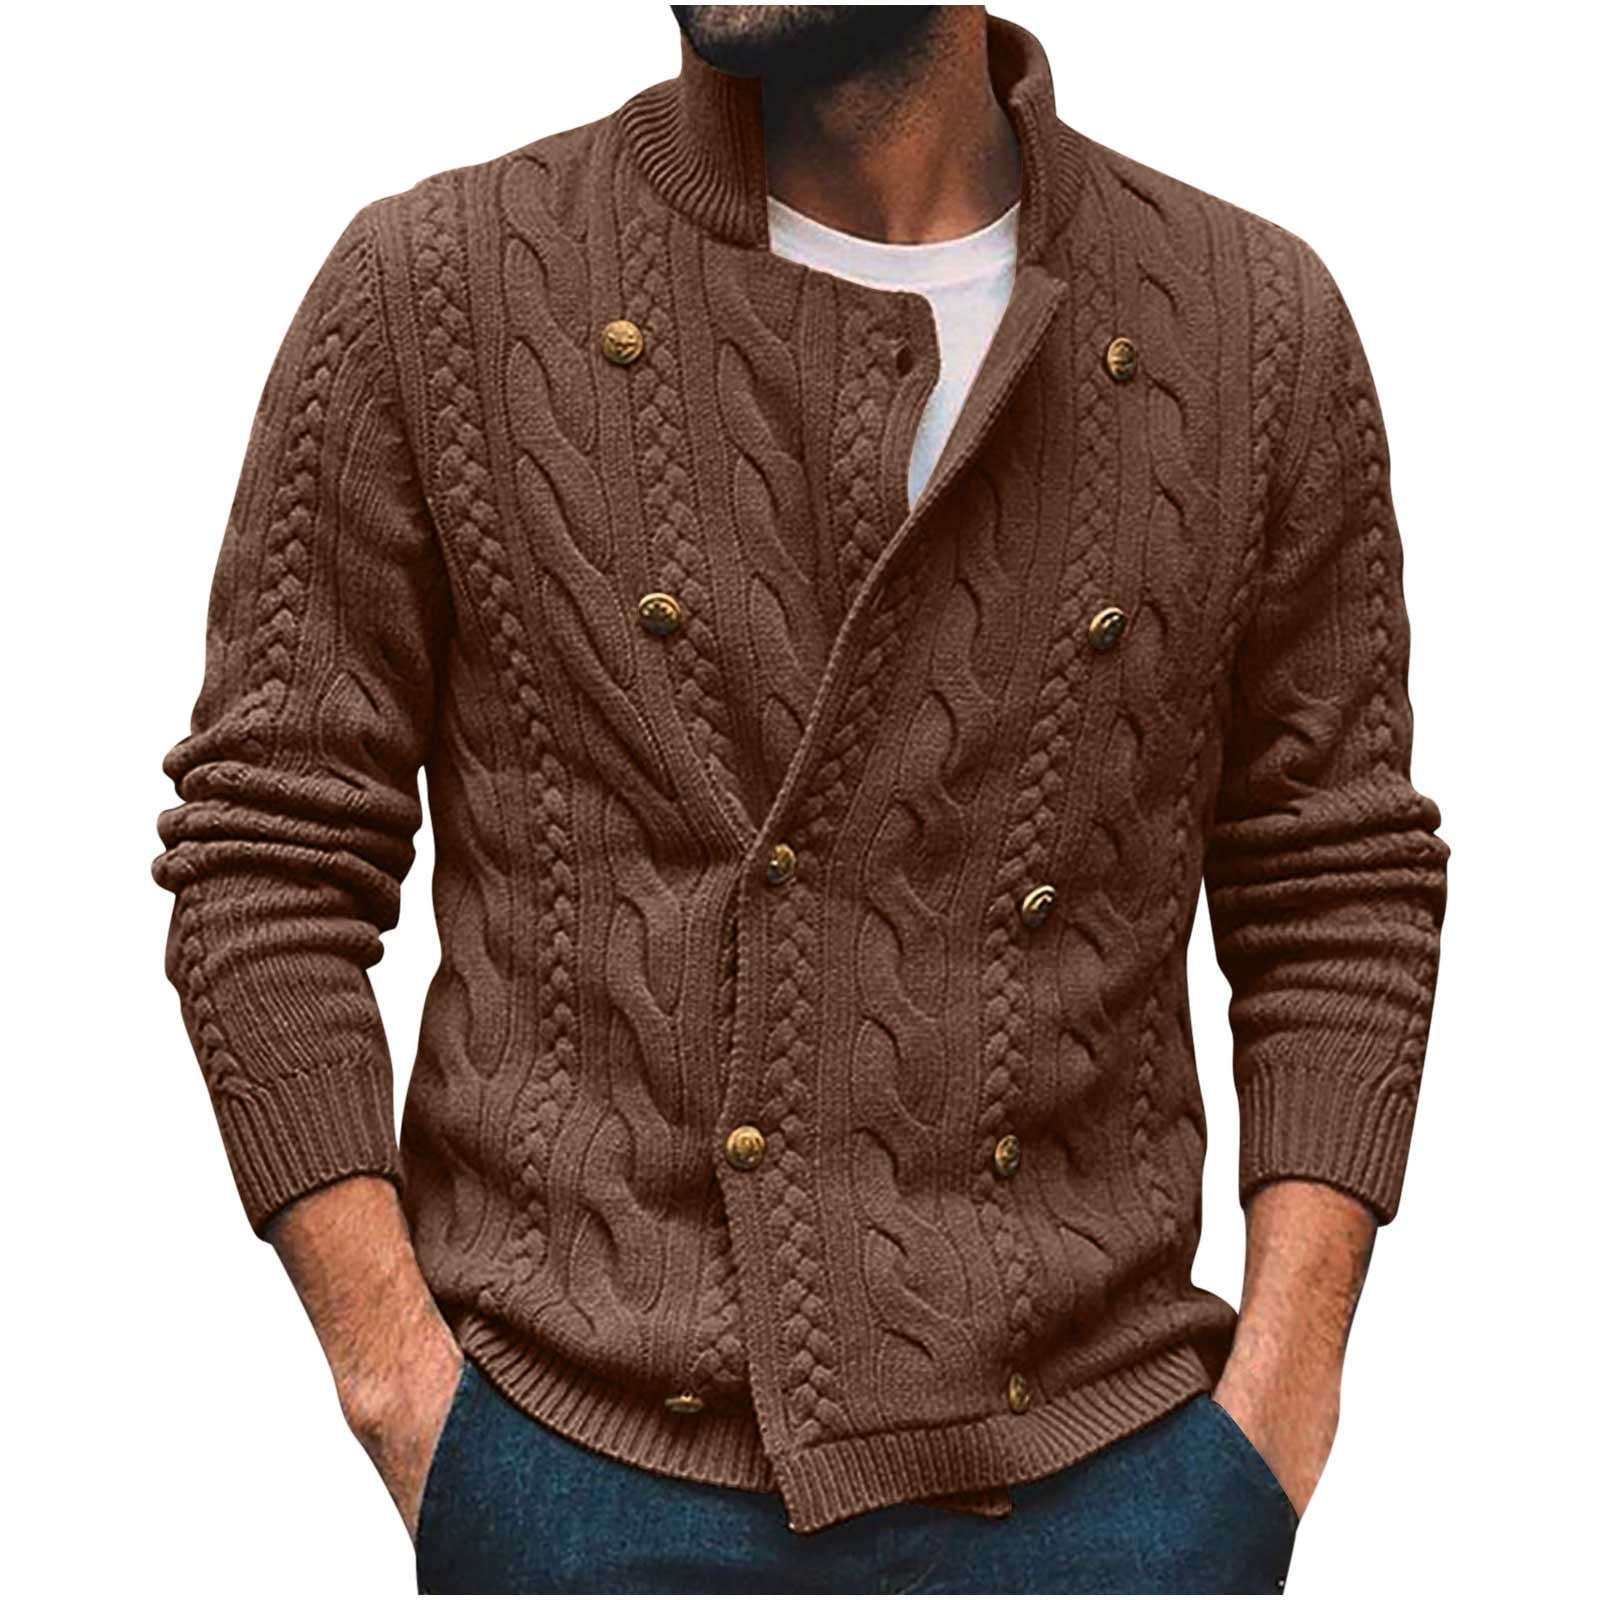 XFLWAM Men's Cardigan Sweaters Stand Collar Open Front Cable Knitted Button Down Knit Sweater ...